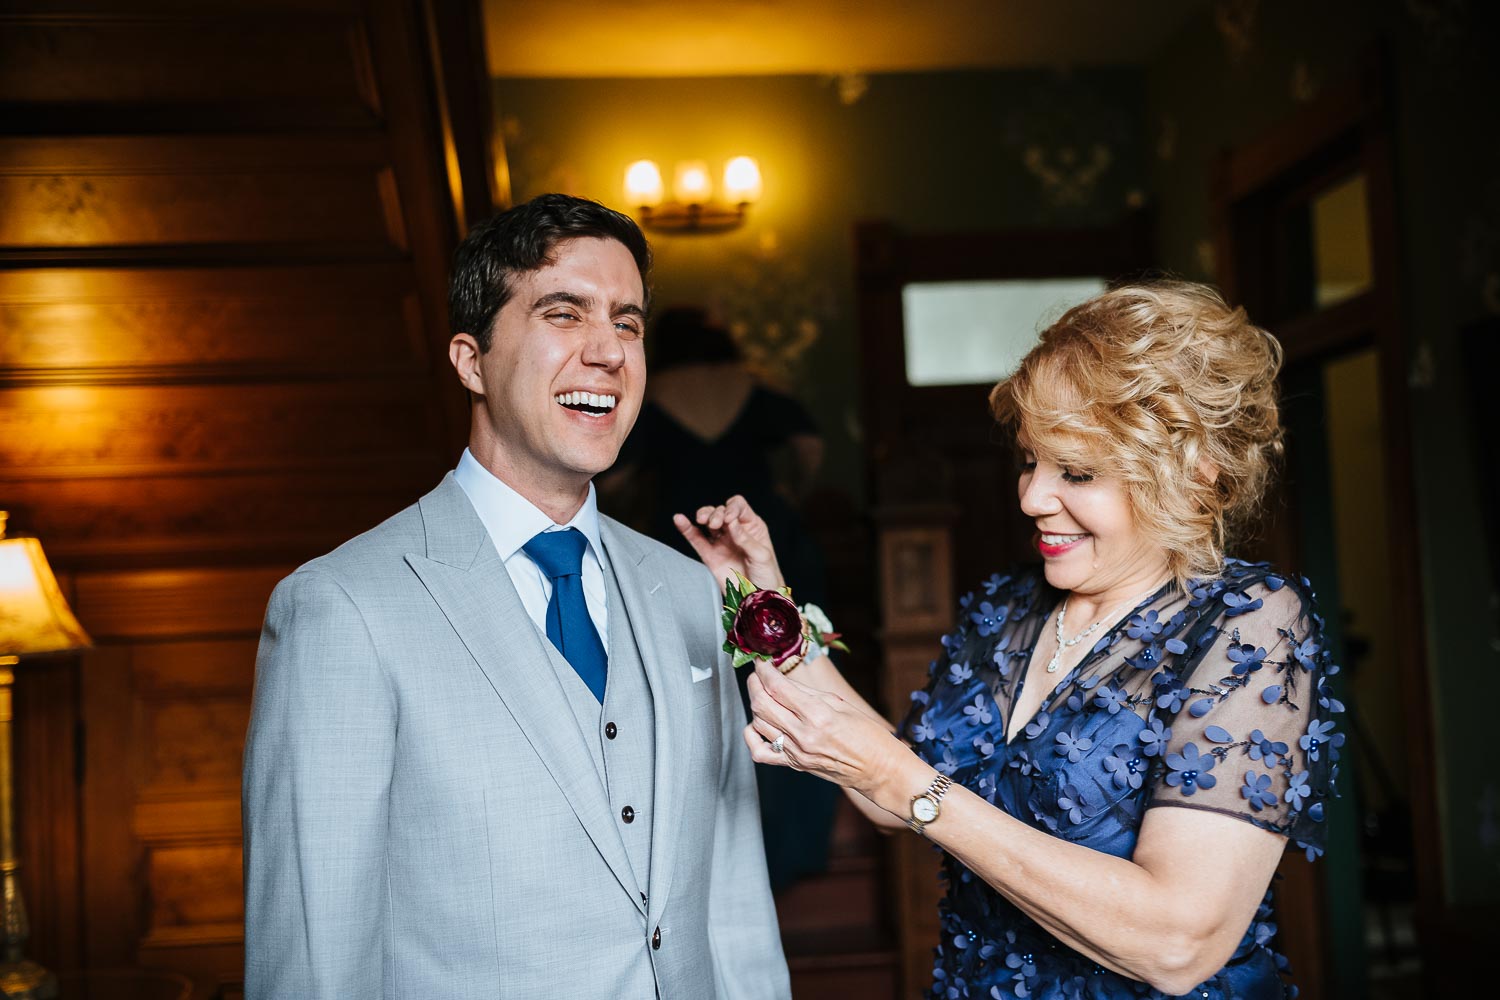 At Barr Mansion, Texas the mother of the bride pins a flower to the grooms jacket